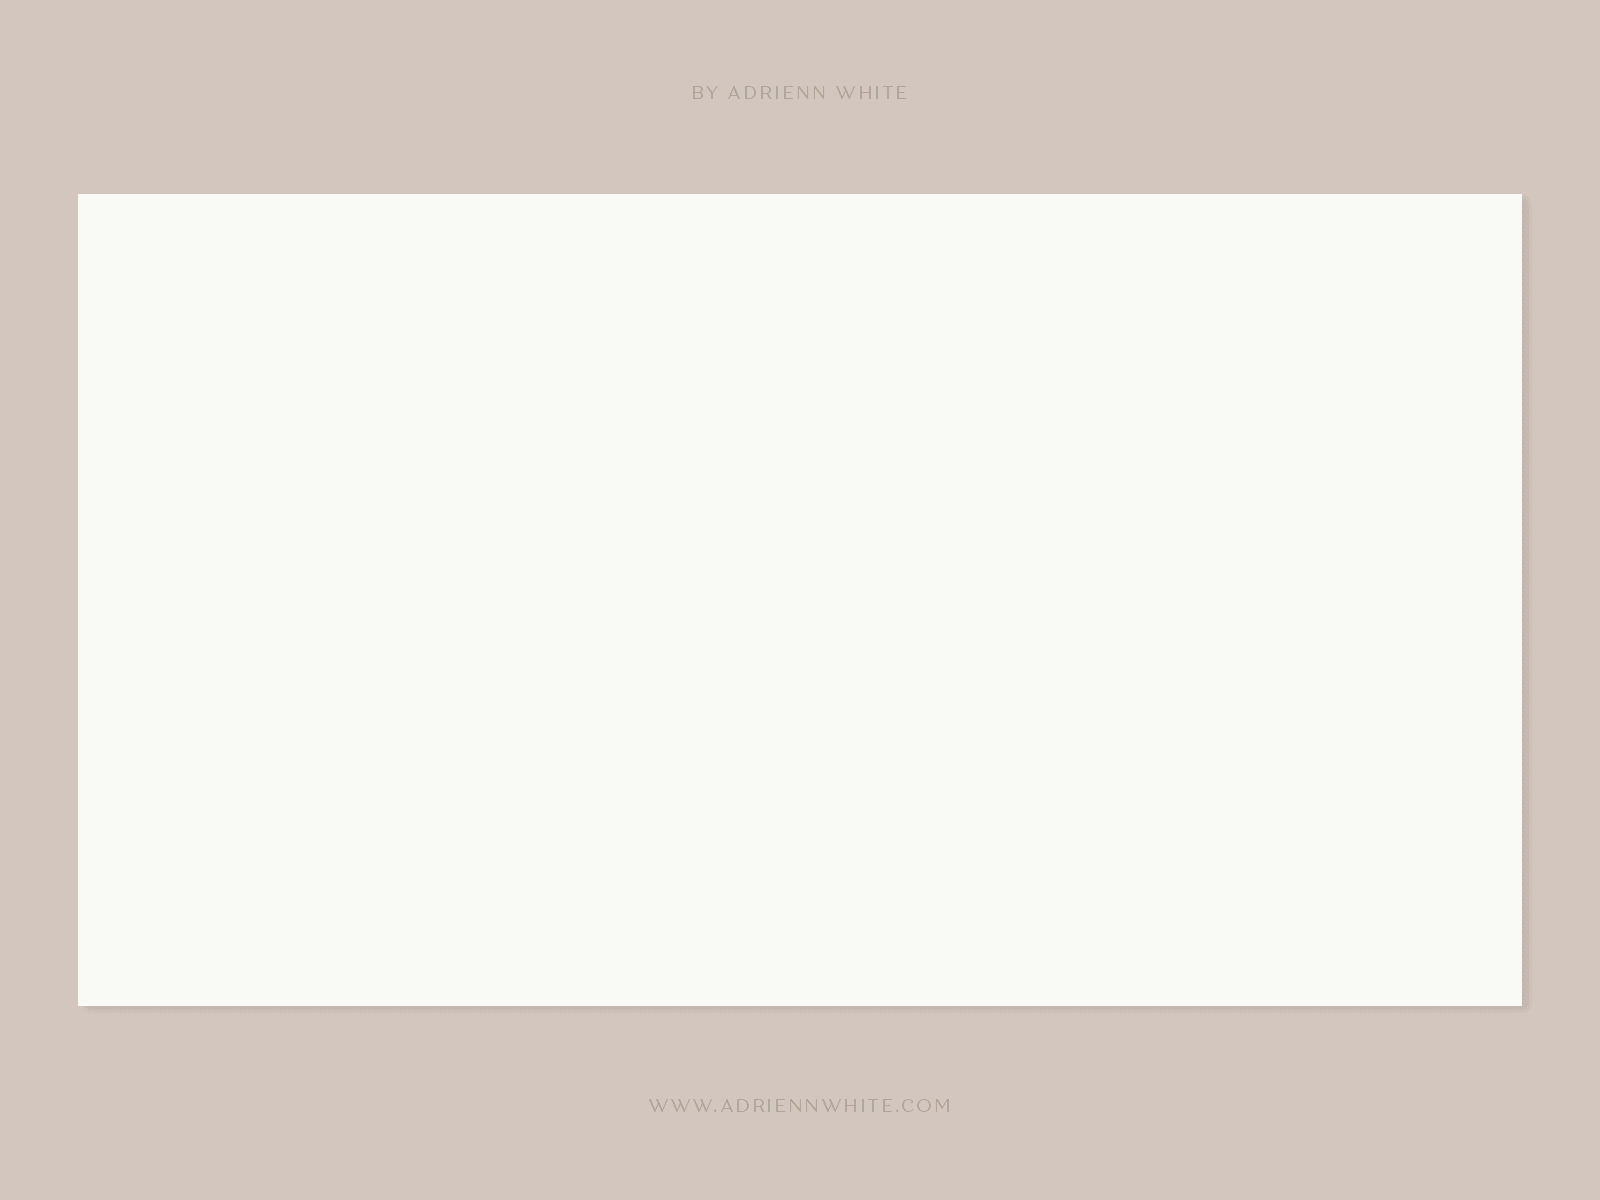 Website Loading Animation Concept for an Ethical Fashion Brand